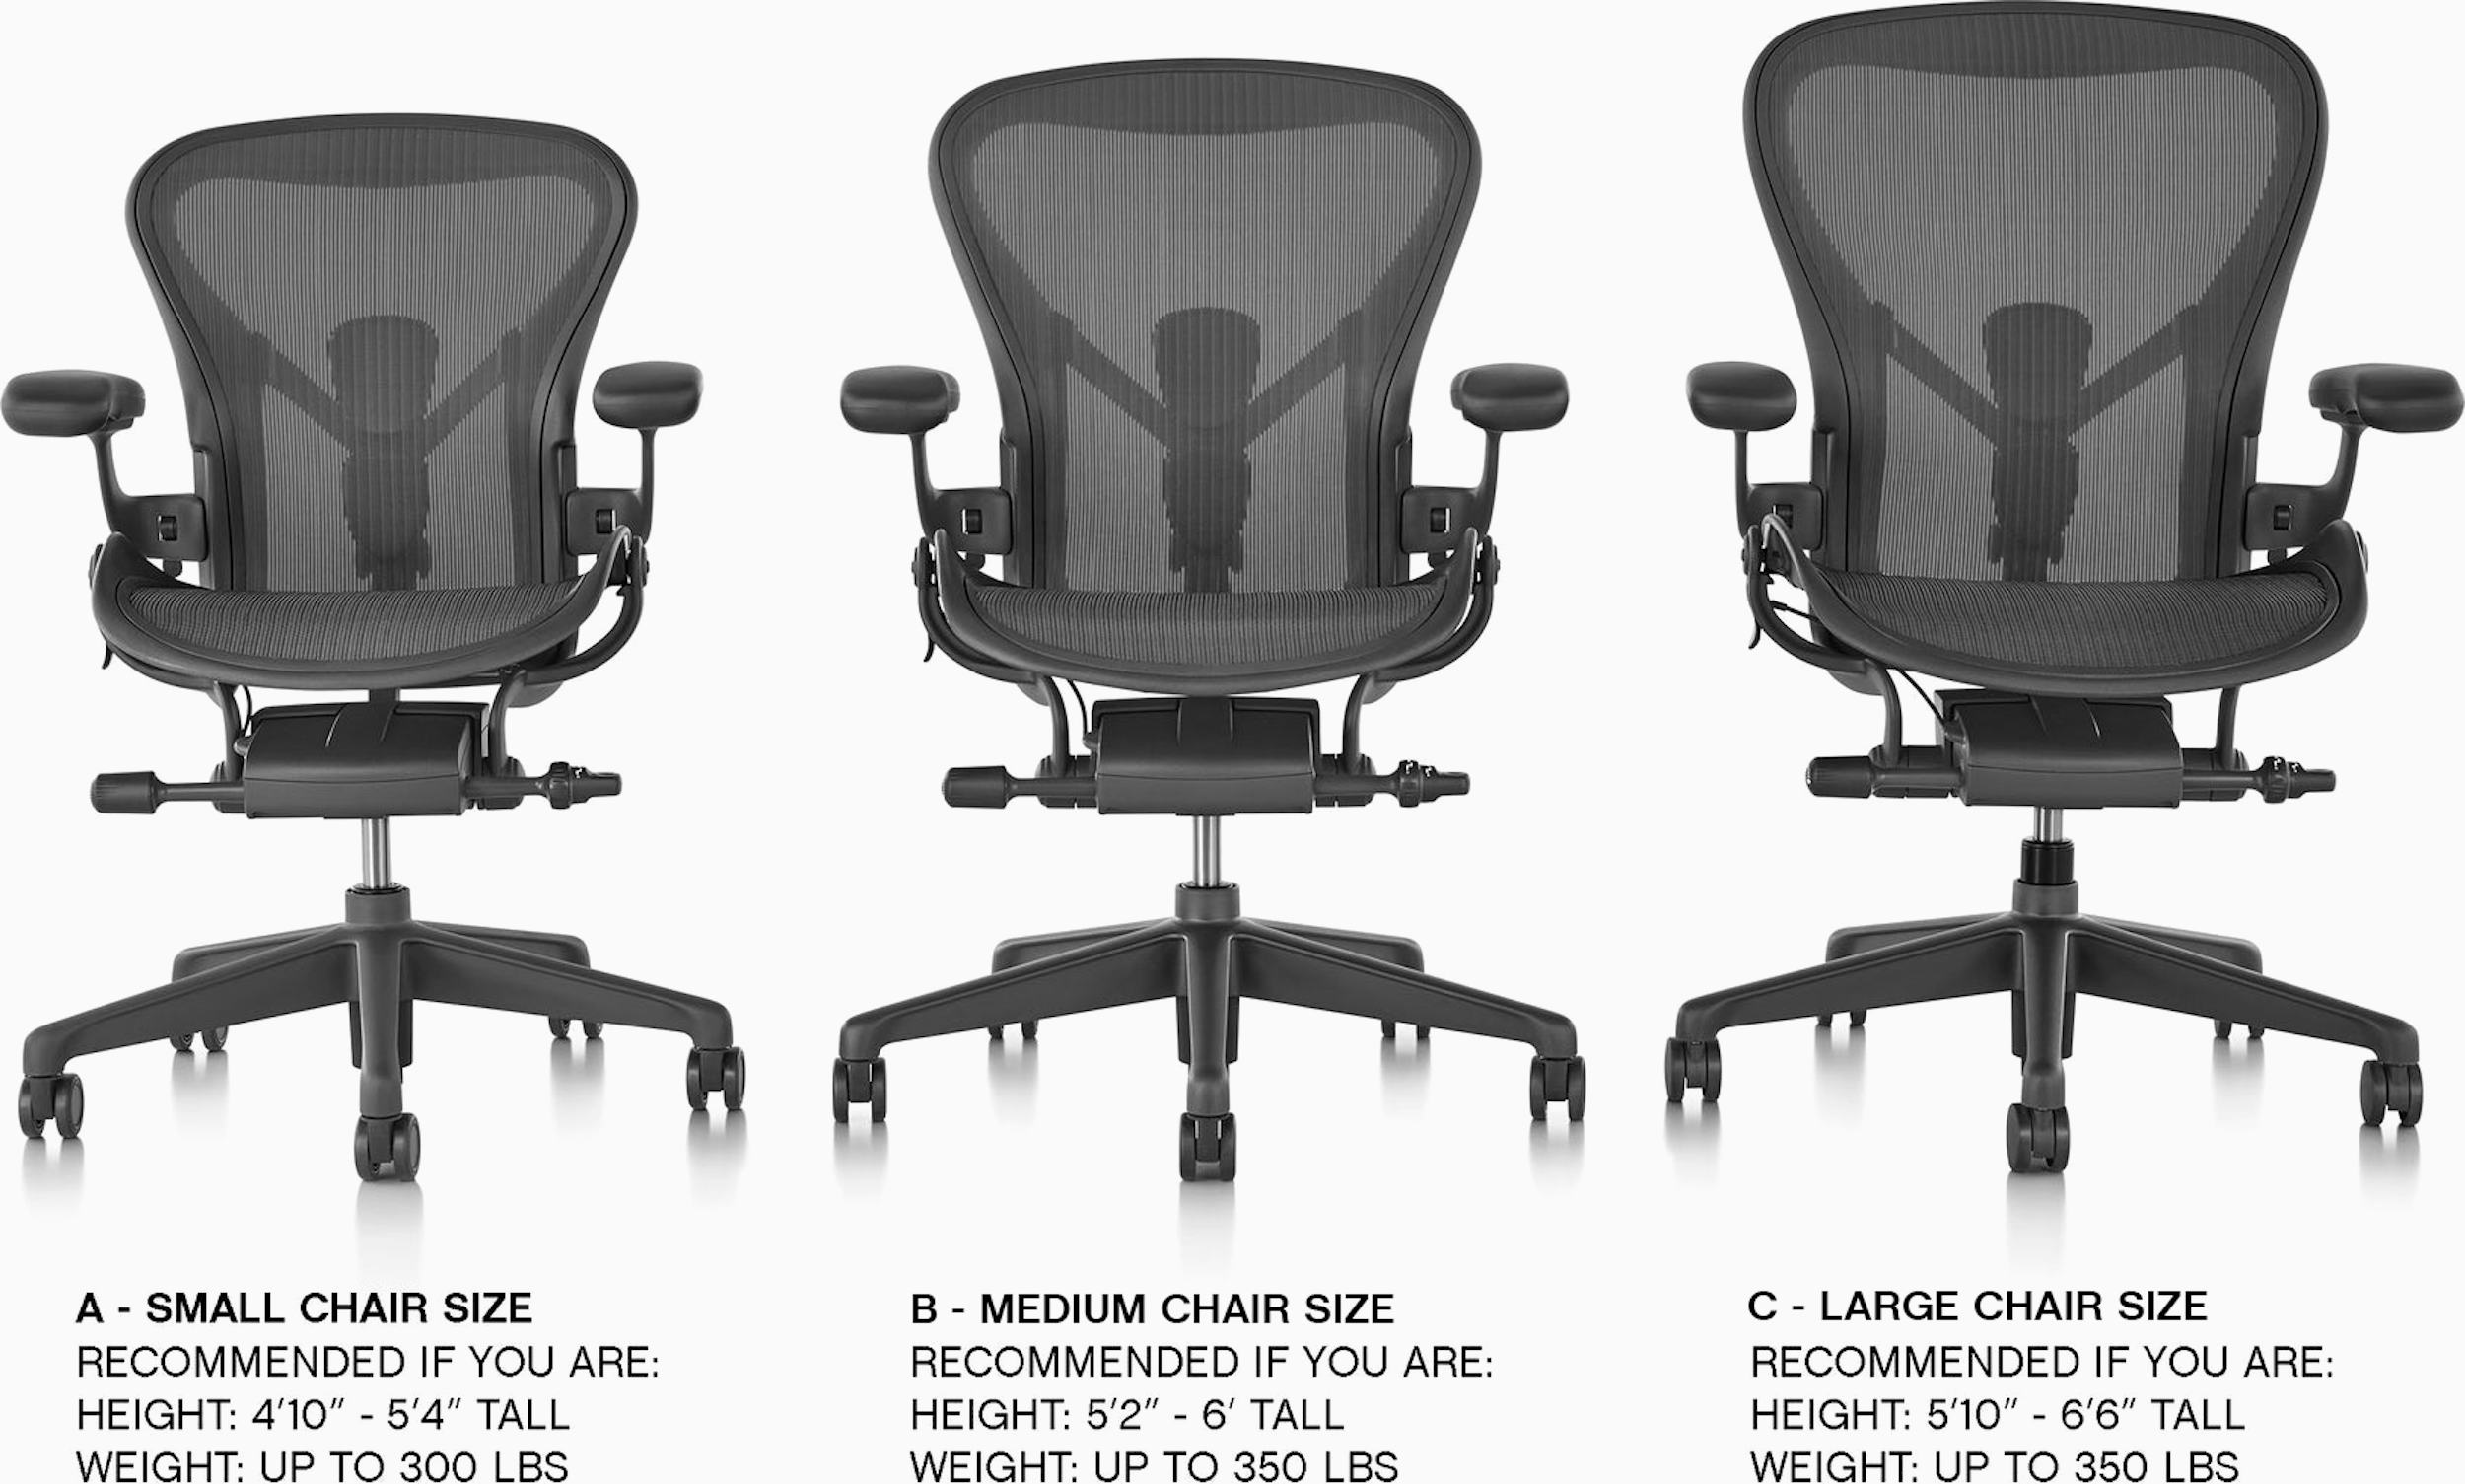 Herman Miller Aeron Chair - Used Office Furniture Chicago Store: Millenium  Office Furniture